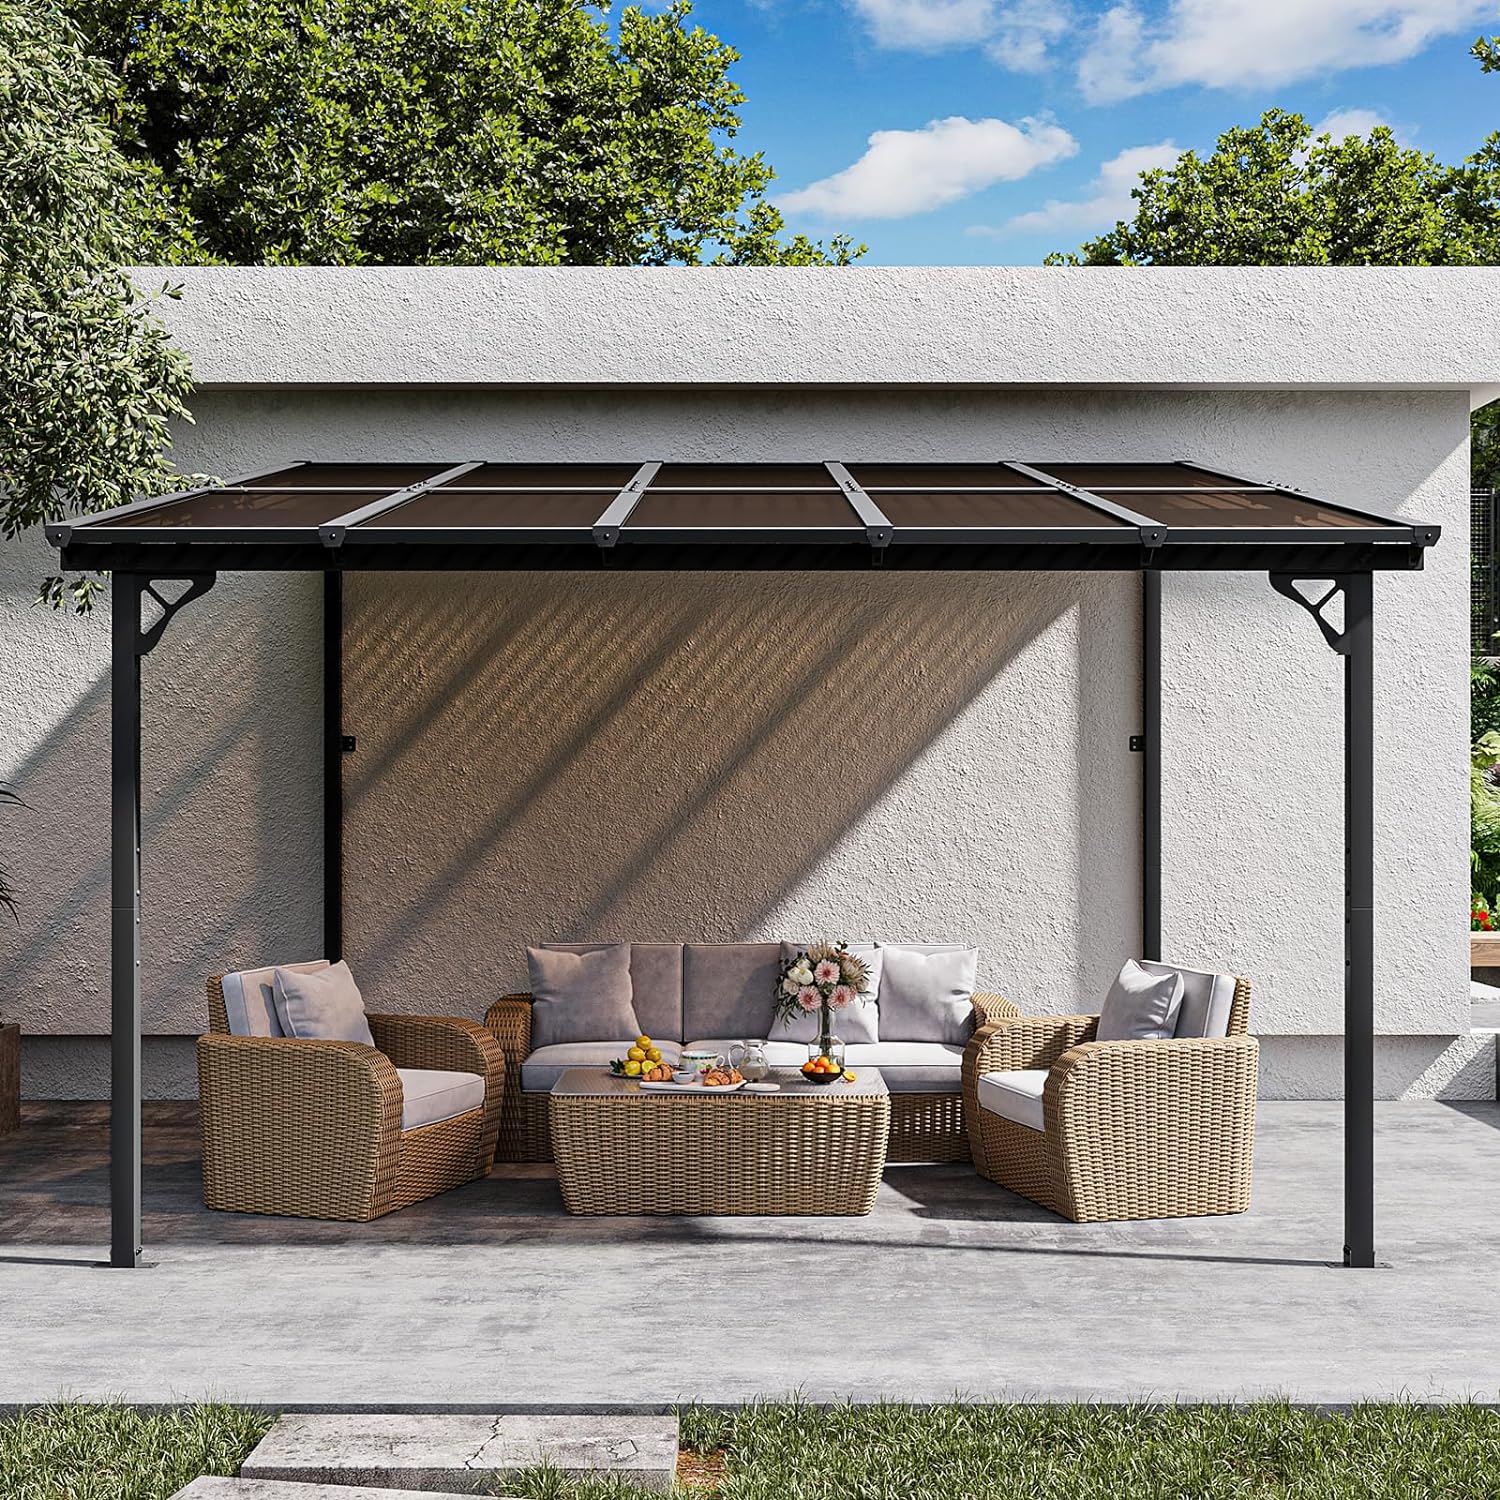 Wall Mounted Lean To Gazebo, Polycarbonate Awnings with Sloped Roof